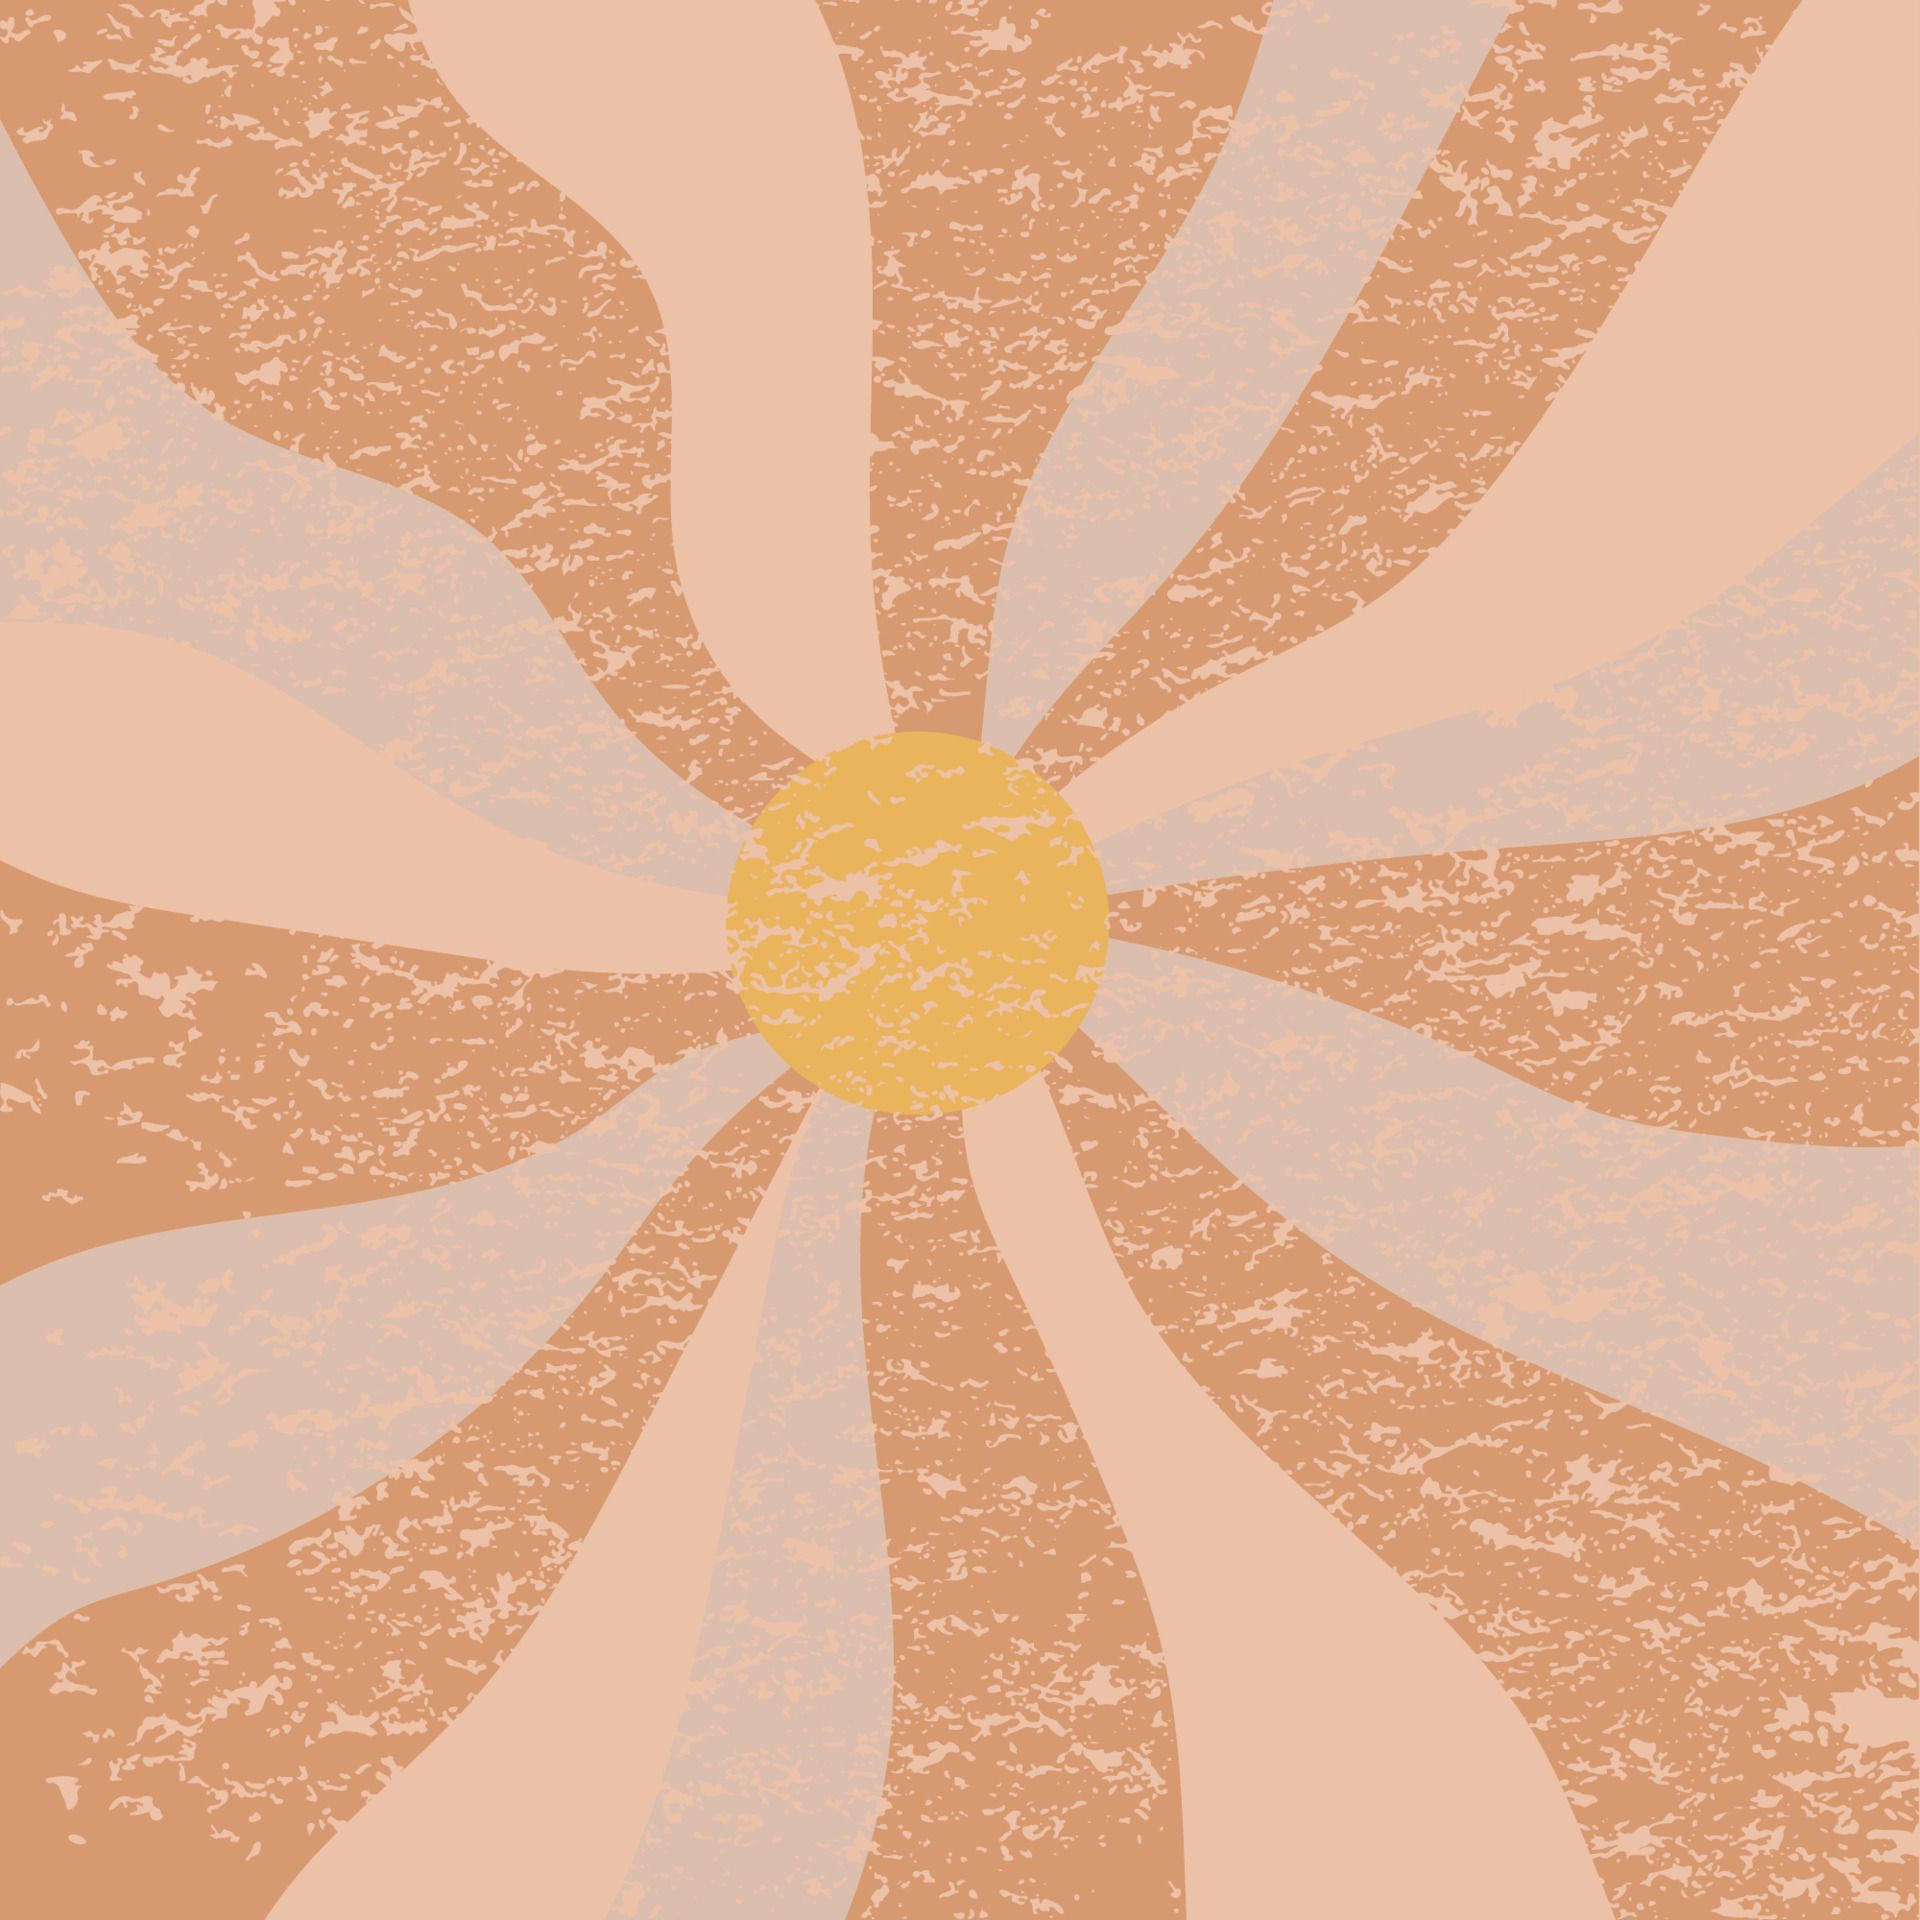 A sunflower in the center of an abstract design - Sunshine